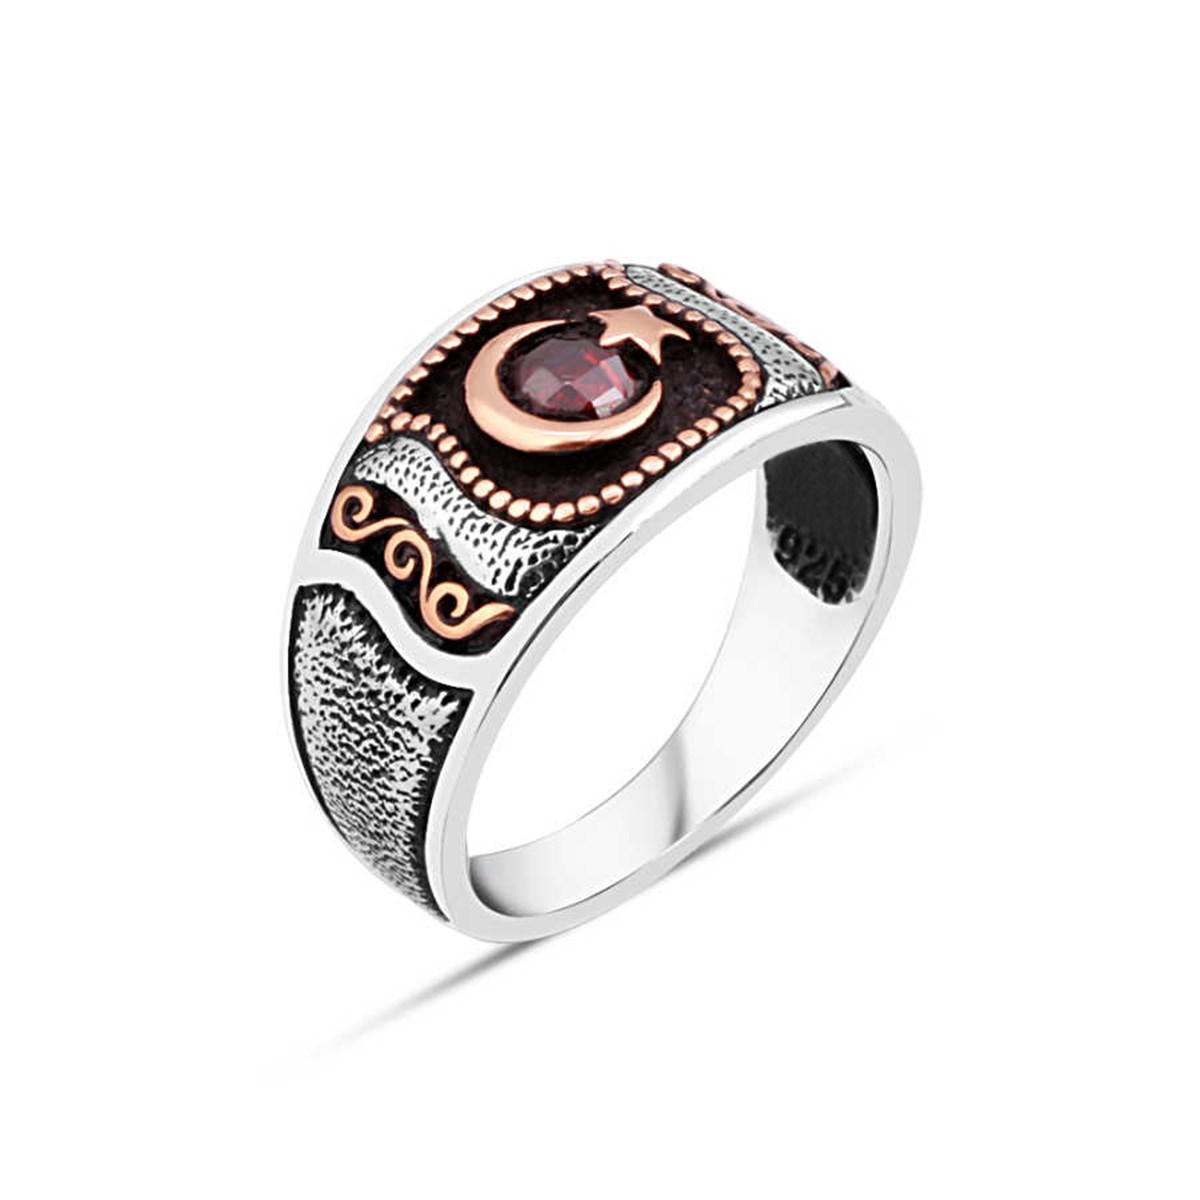 Moon-Star Silver Men's Ring with Zircon Stone in the Middle